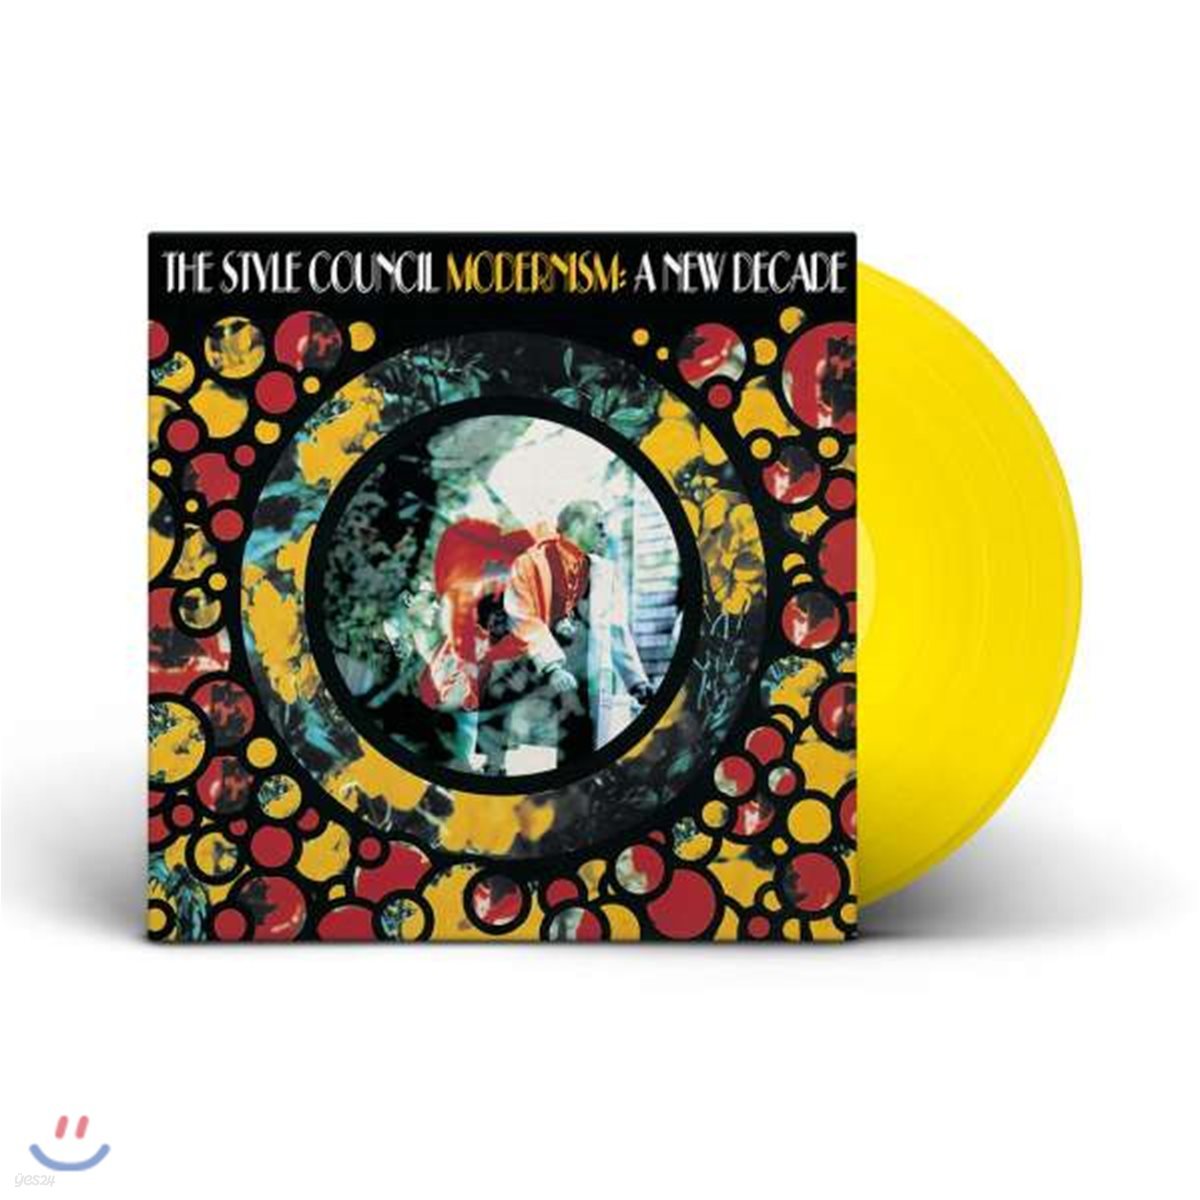 Style Council (스타일 카운실) - Modernism: A New Decade [옐로우 컬러디스크 Limited Edition 2 LP]